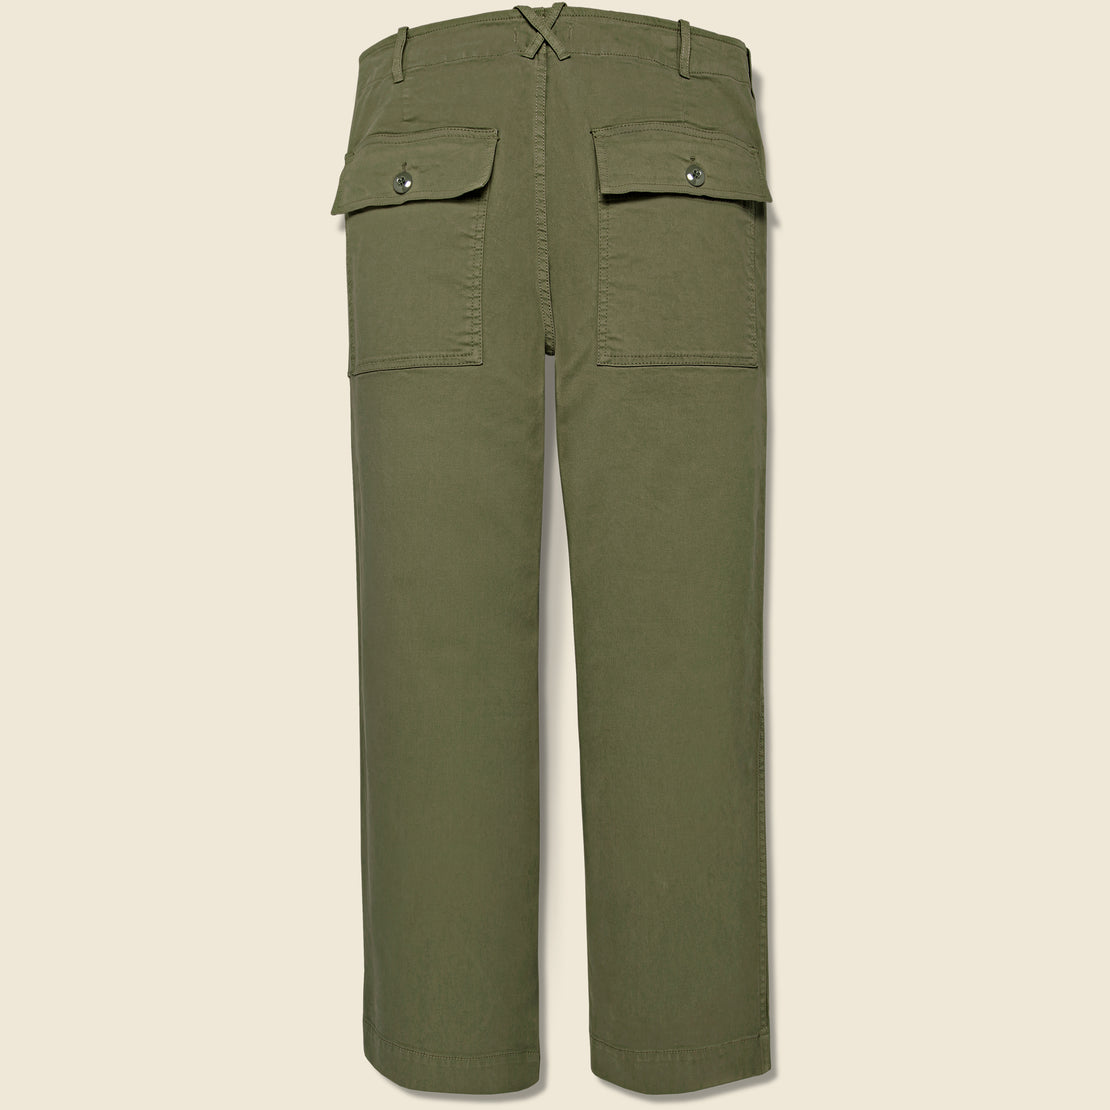 Field Chino - Military Olive - Alex Mill - STAG Provisions - Pants - Twill